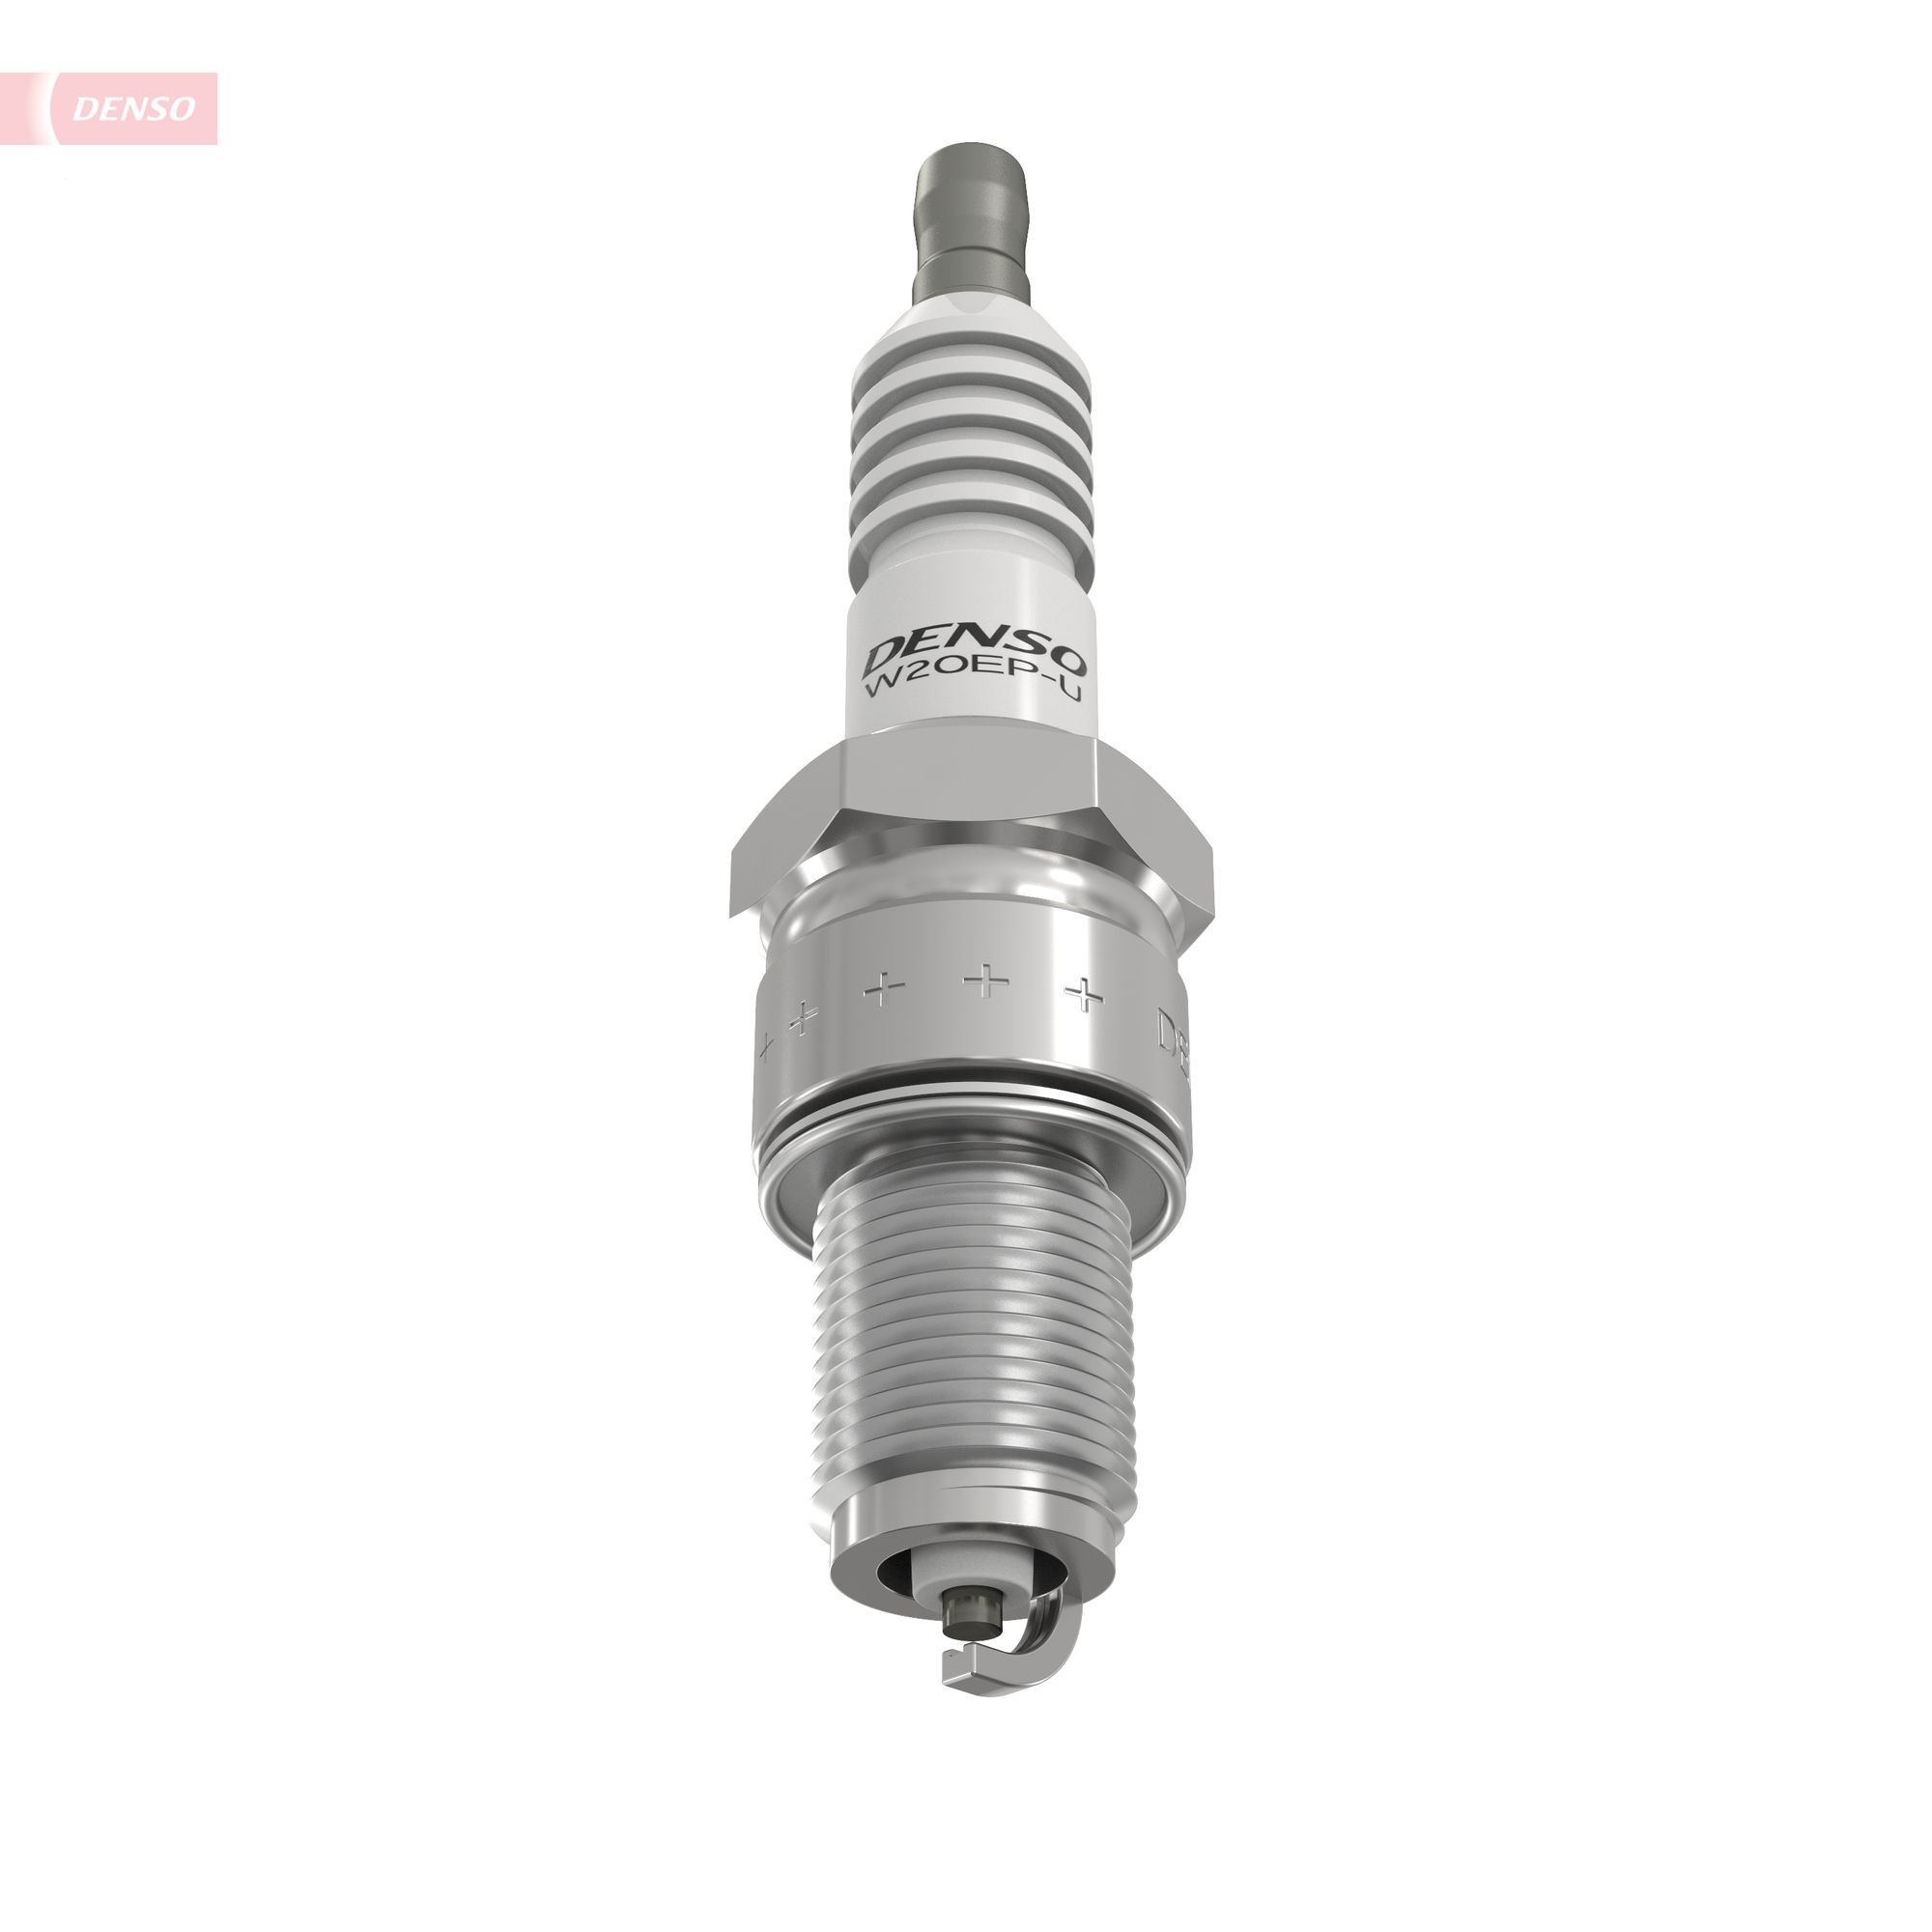 DENSO Spark plugs 3043 buy online